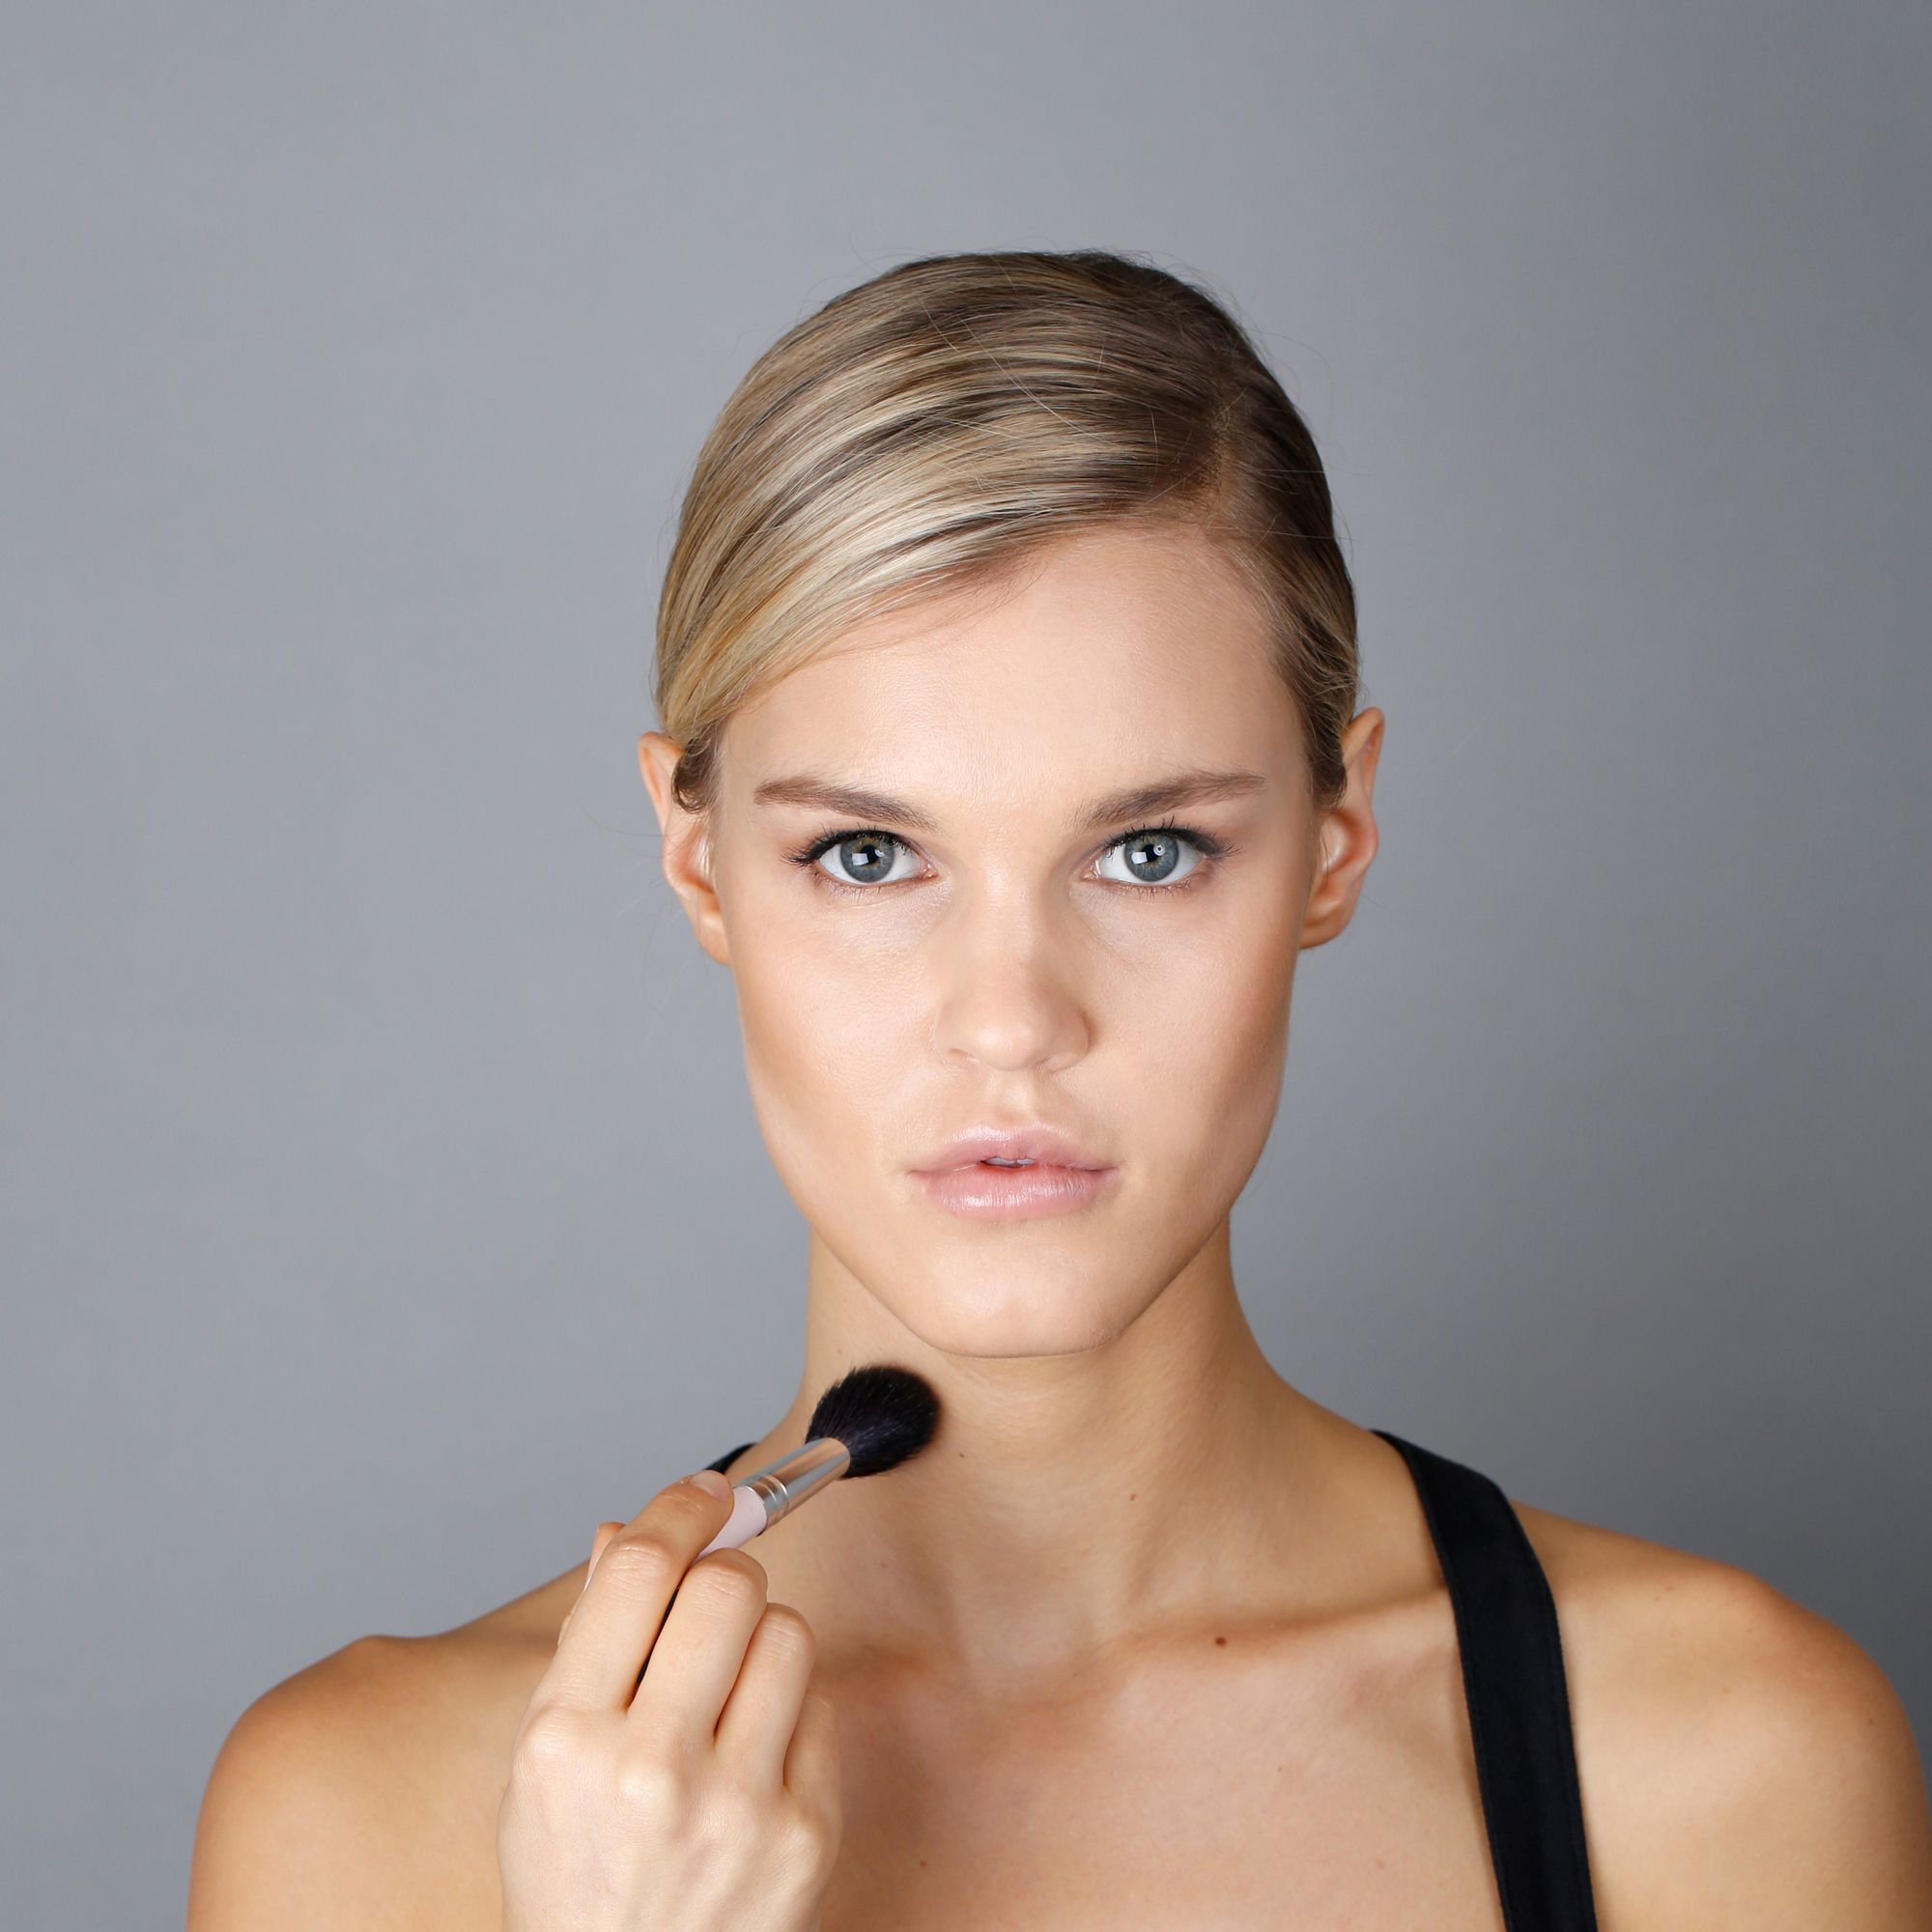 How To Blend Contour Makeup: Tips and Tools